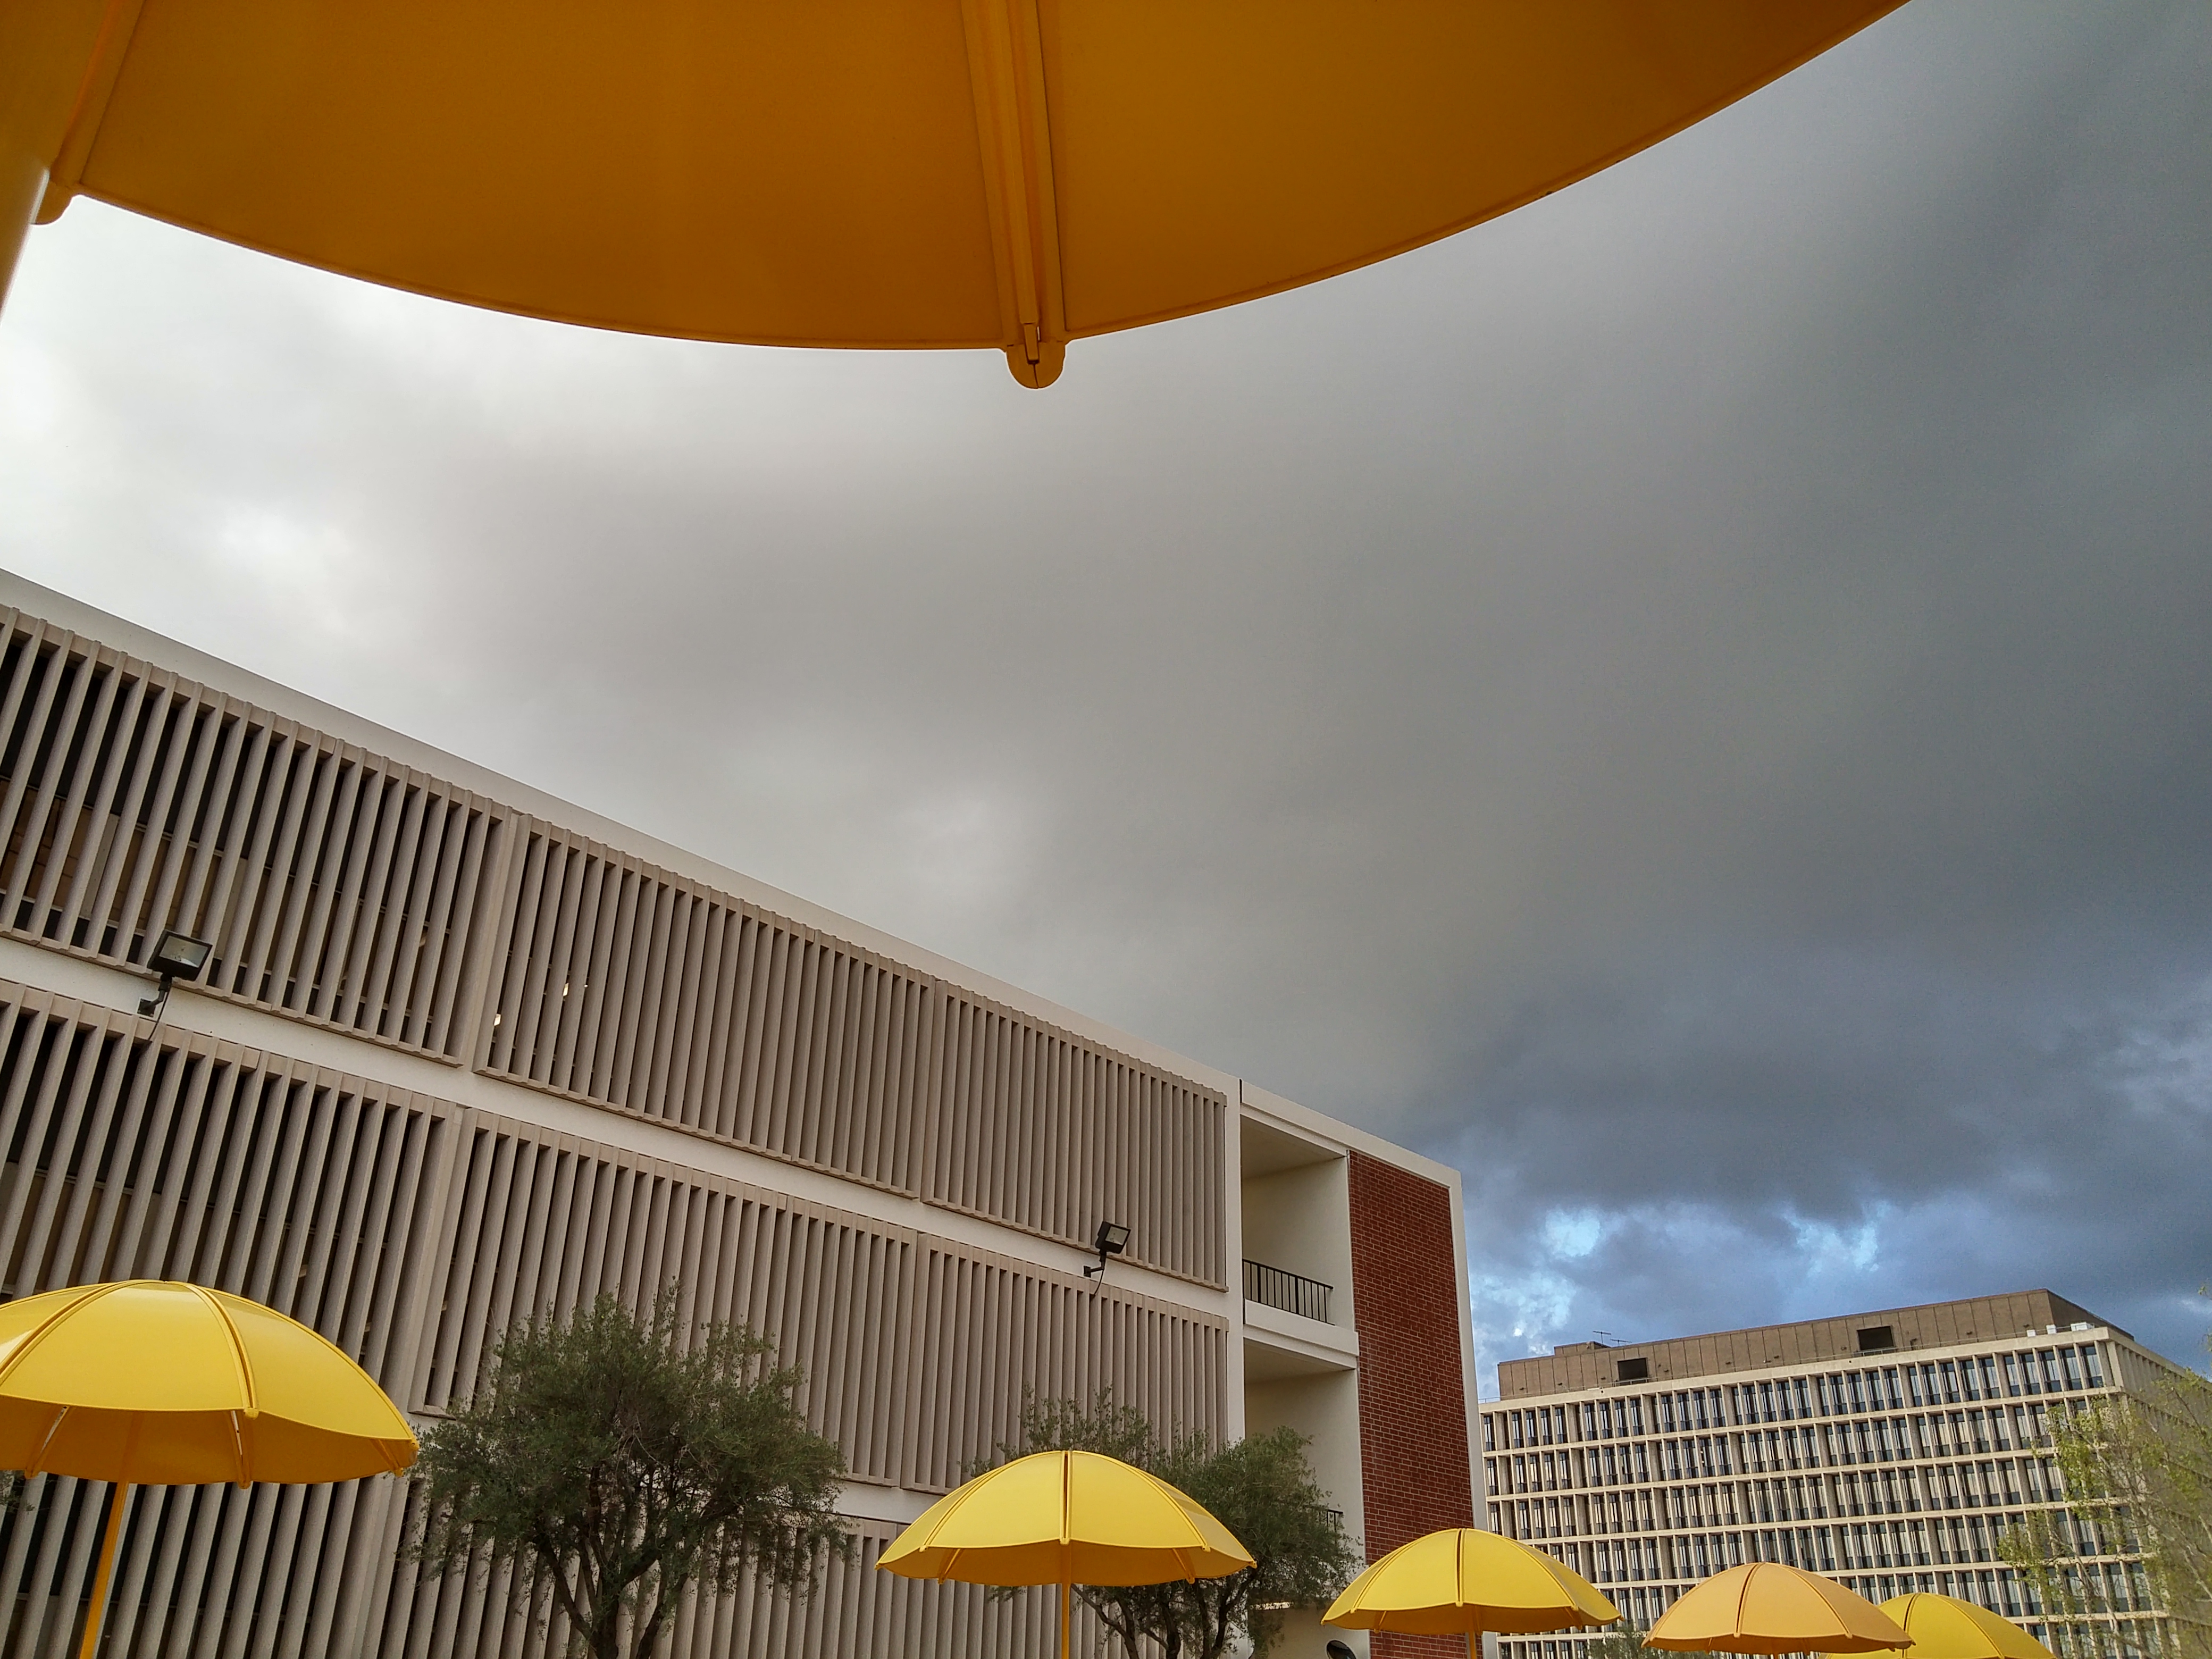 Ominous Clouds Over Csula